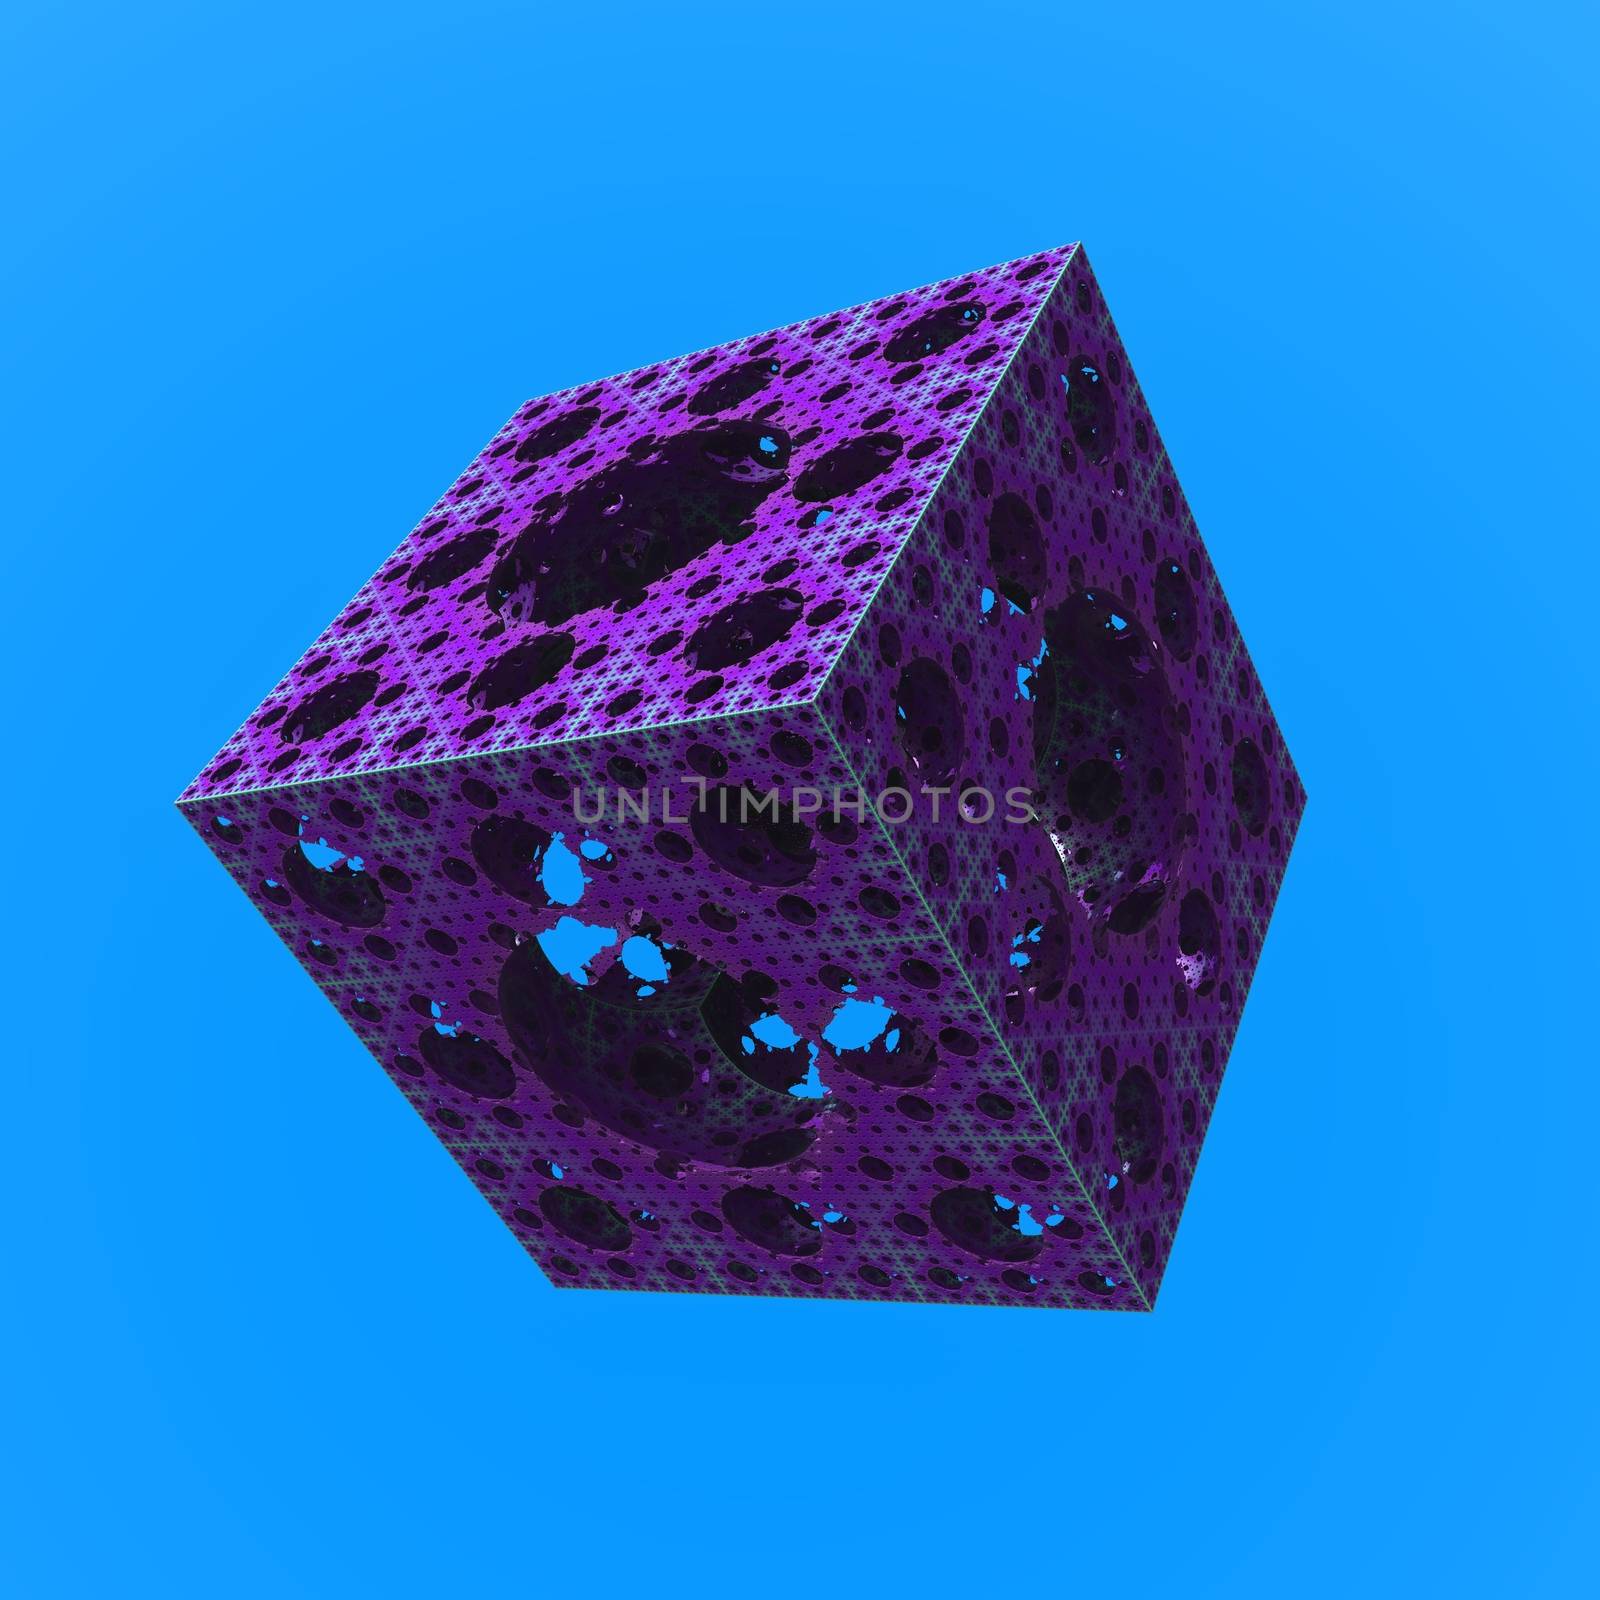 Cube with tech patterns.